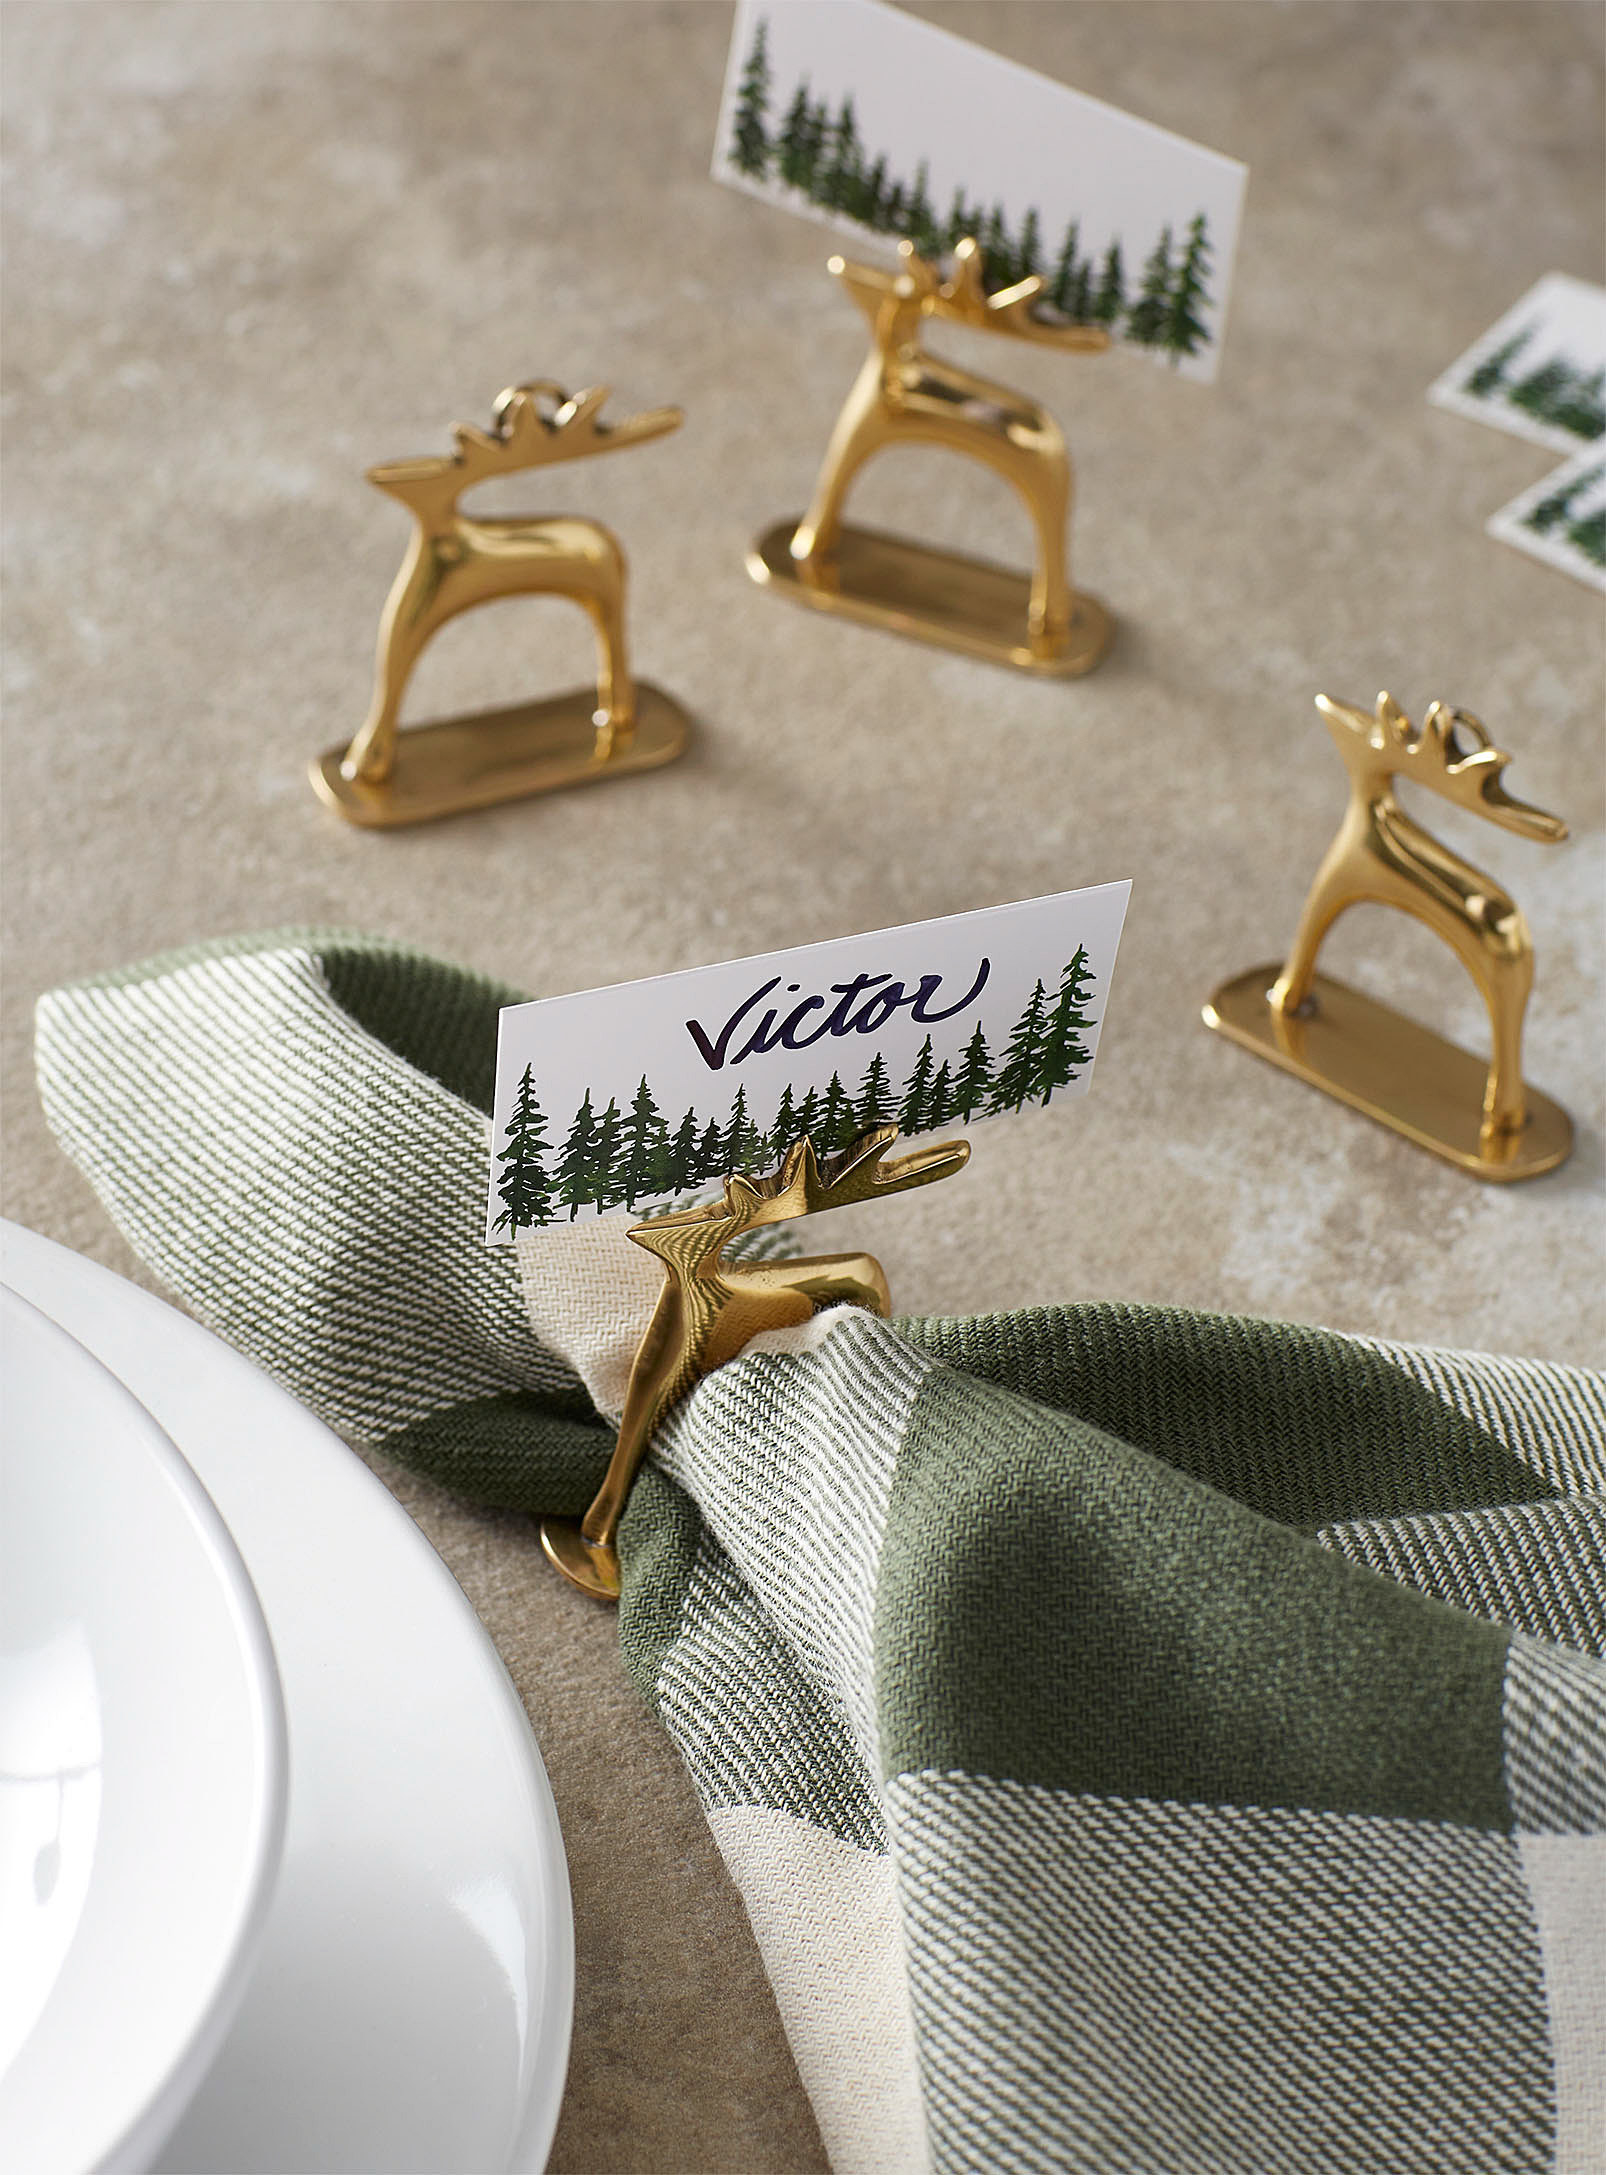 the napkin rings on a table with one around a napkin and the place cards in them